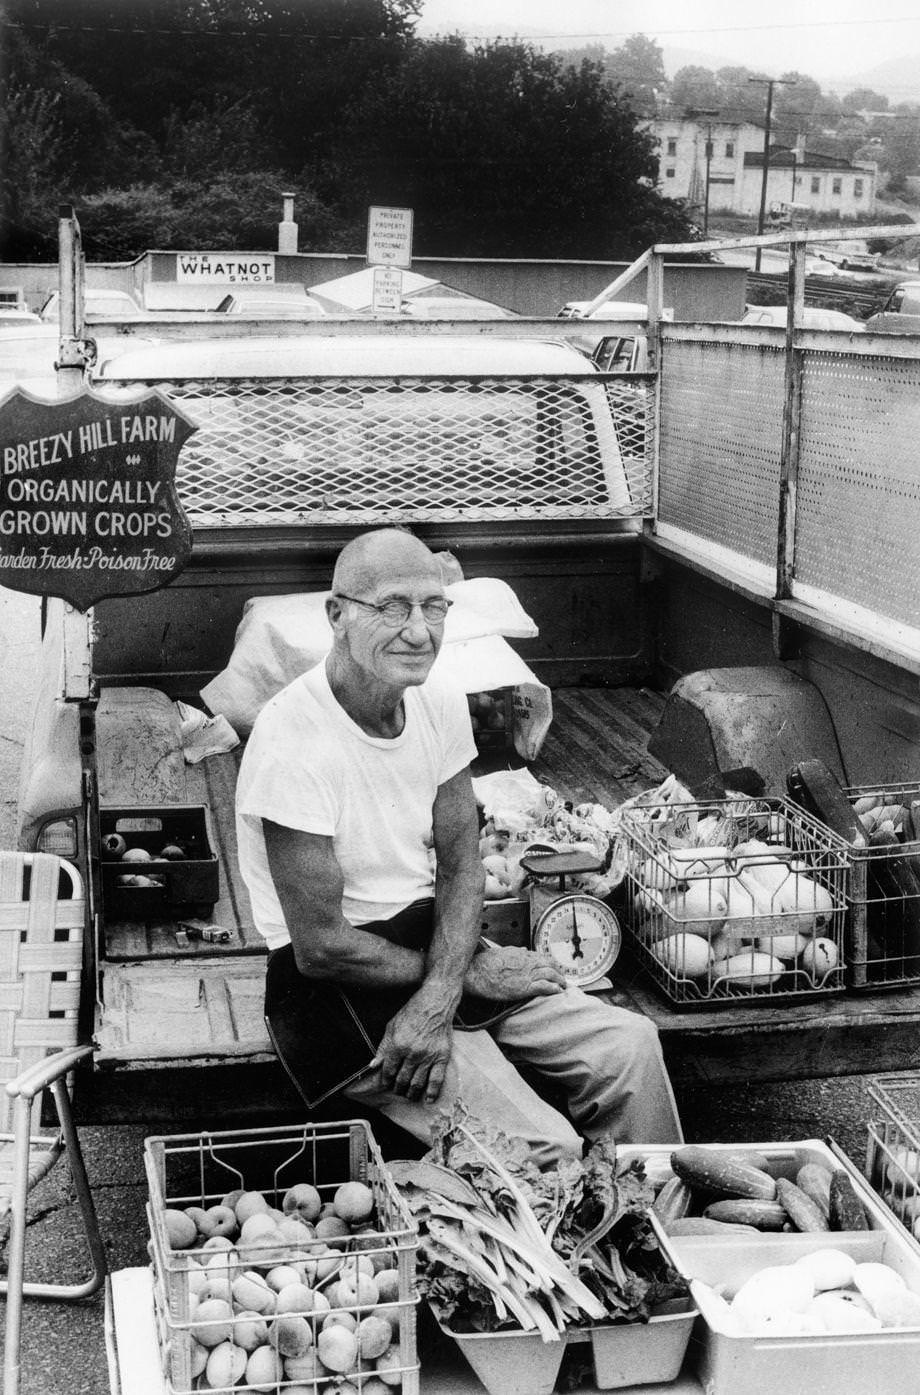 Peter Sargent of Breezy Hill Farm in Albemarle County sold his vegetables at a Charlottesville farmers market, 1979.